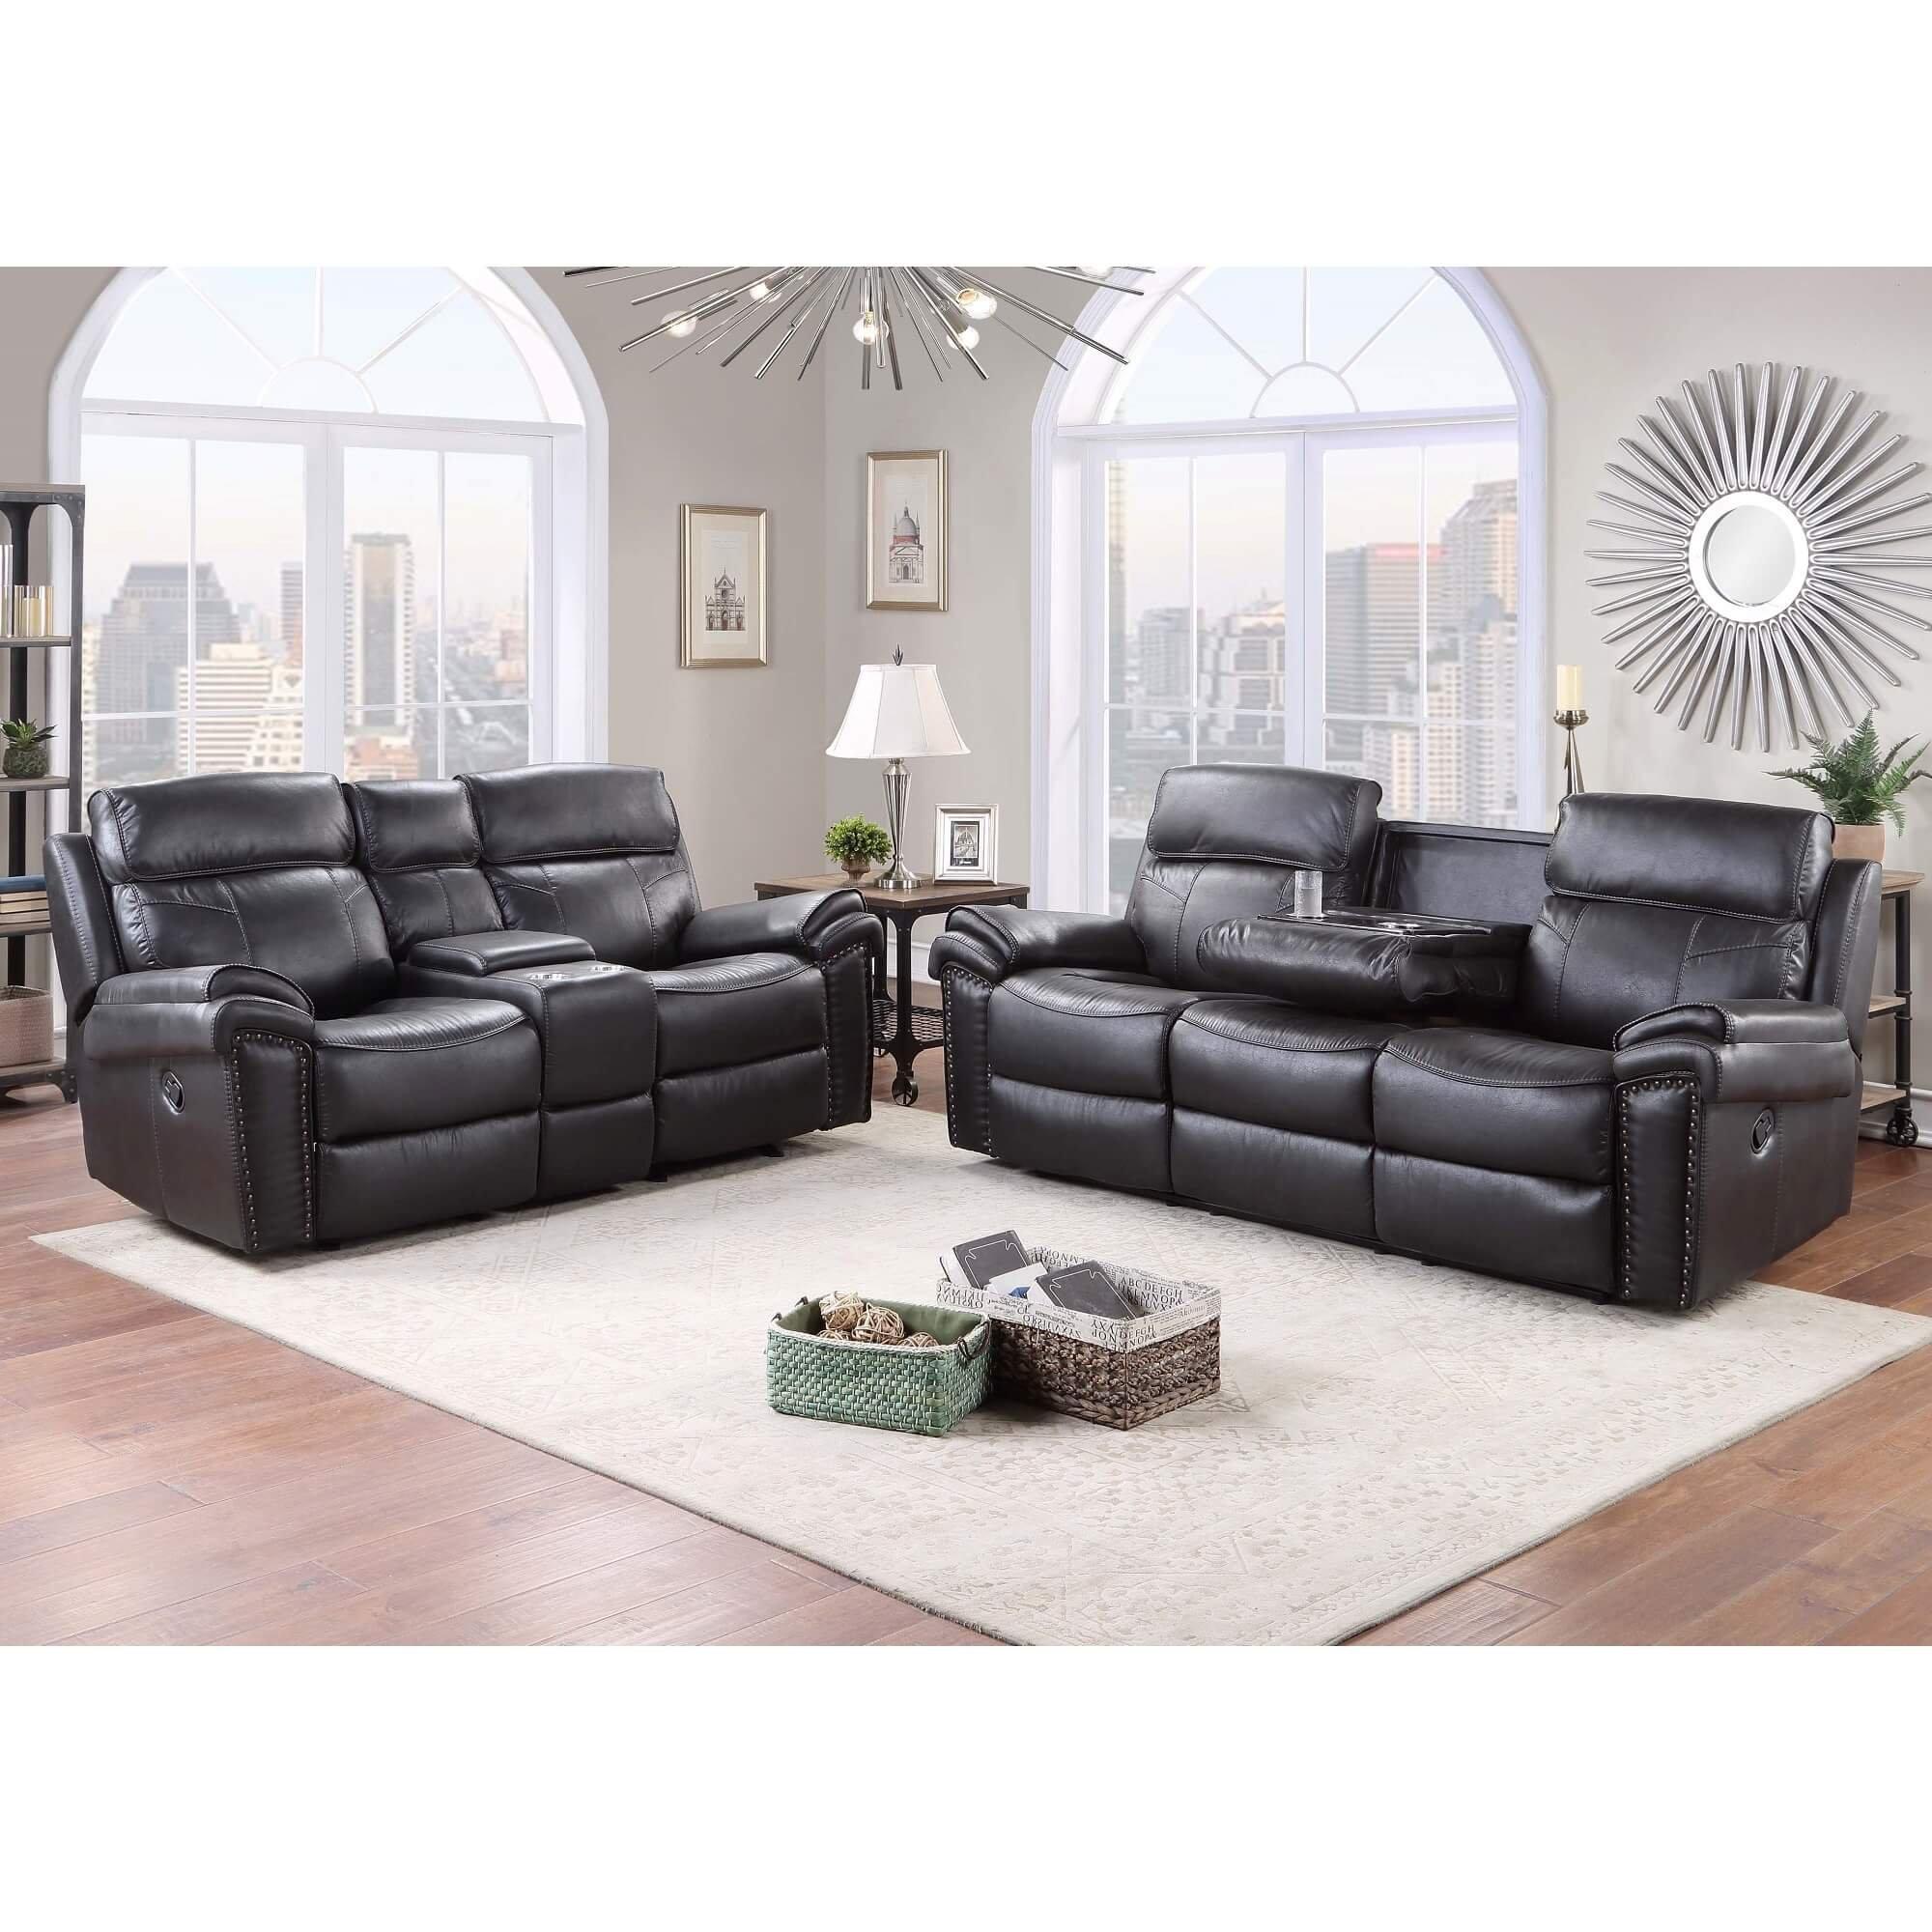 Rent to Own H317 2-Piece Domino Reclining Sofa w/ Drop Down Table ...